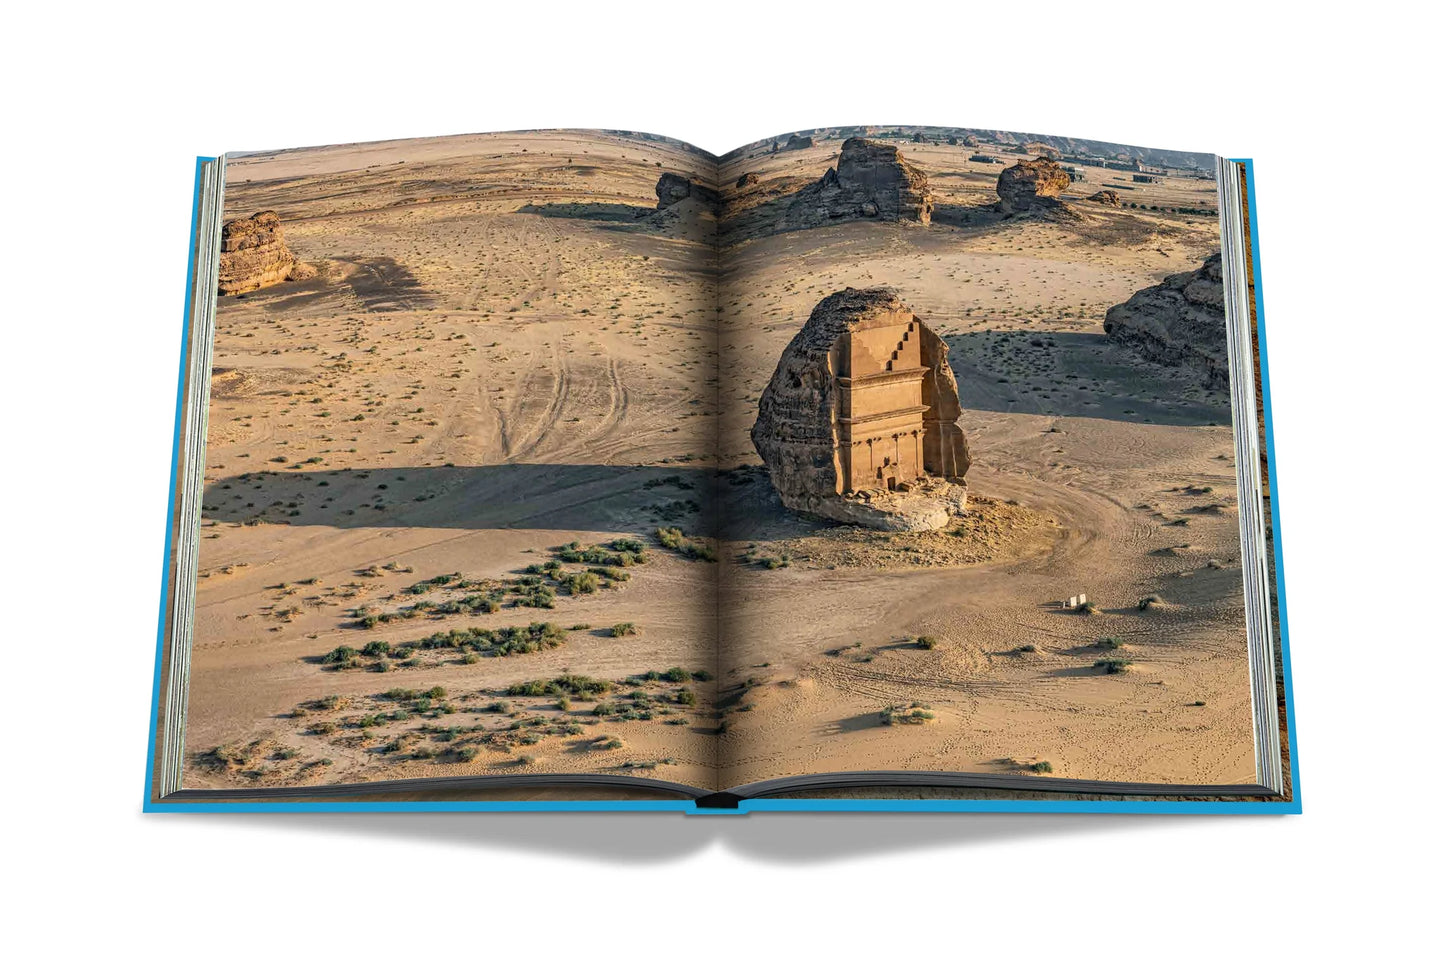 AlUla Book (2nd Edition): Impossible Collection